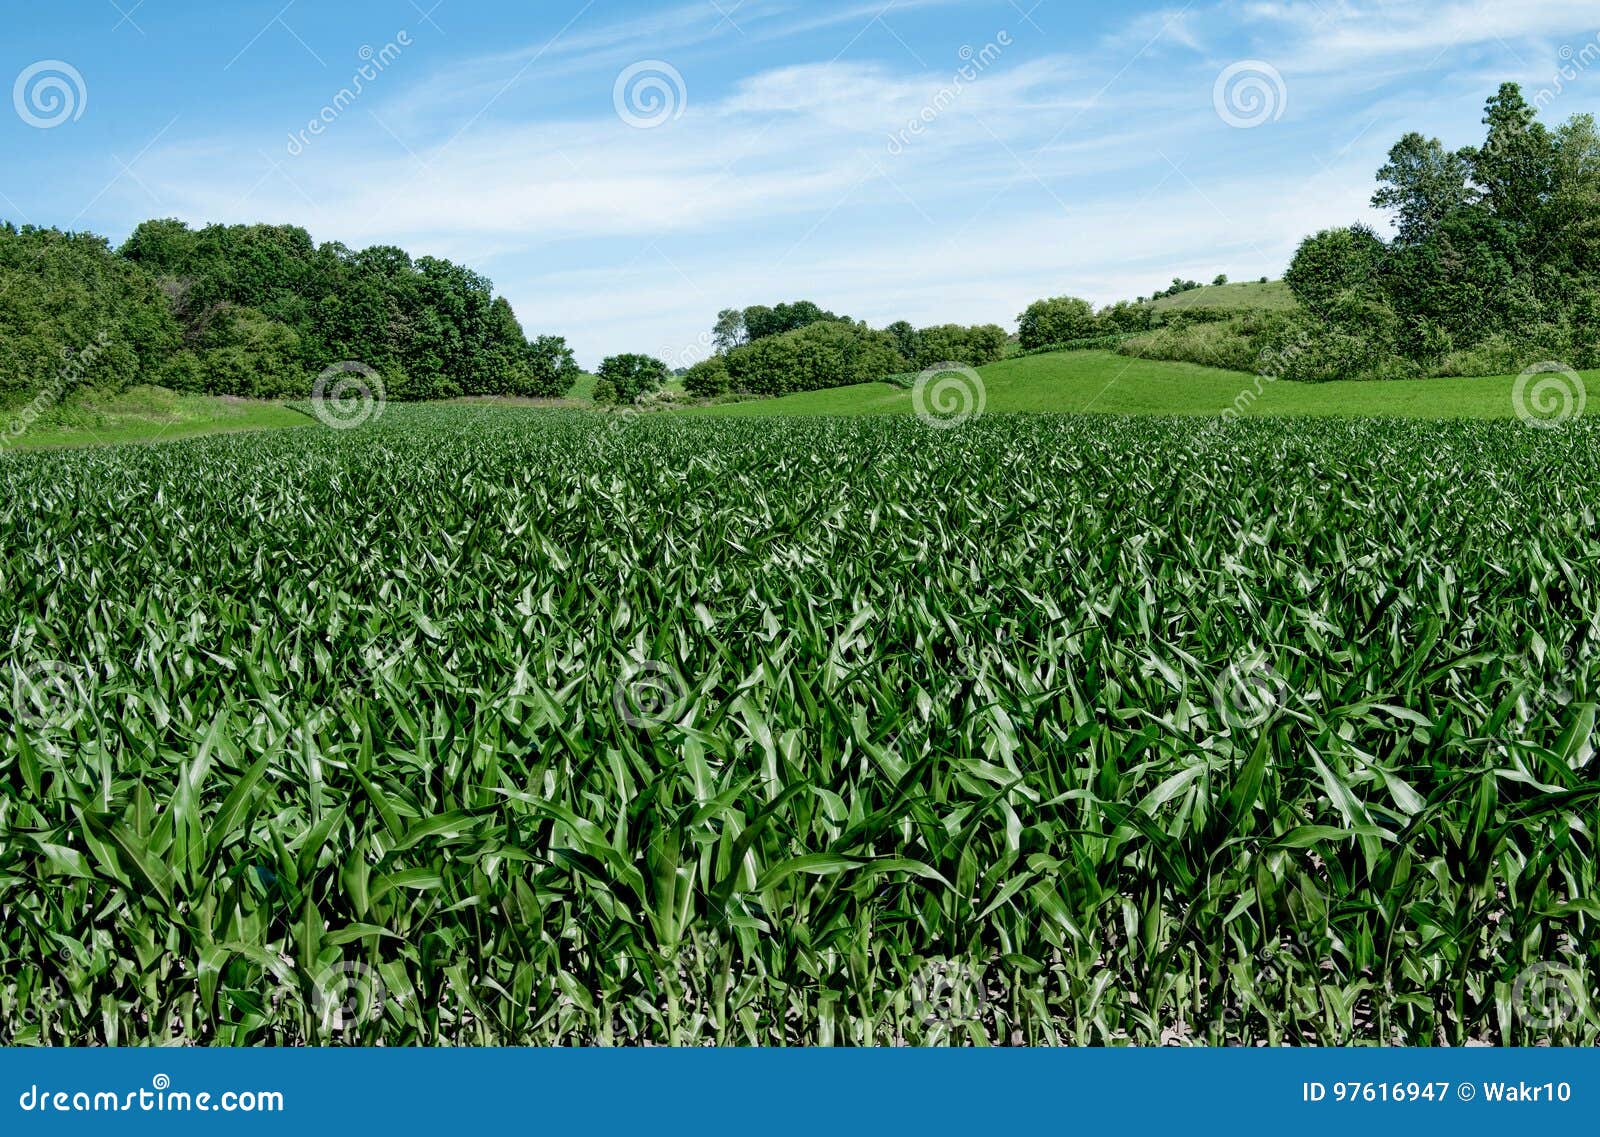 corn fields on the fourth of july